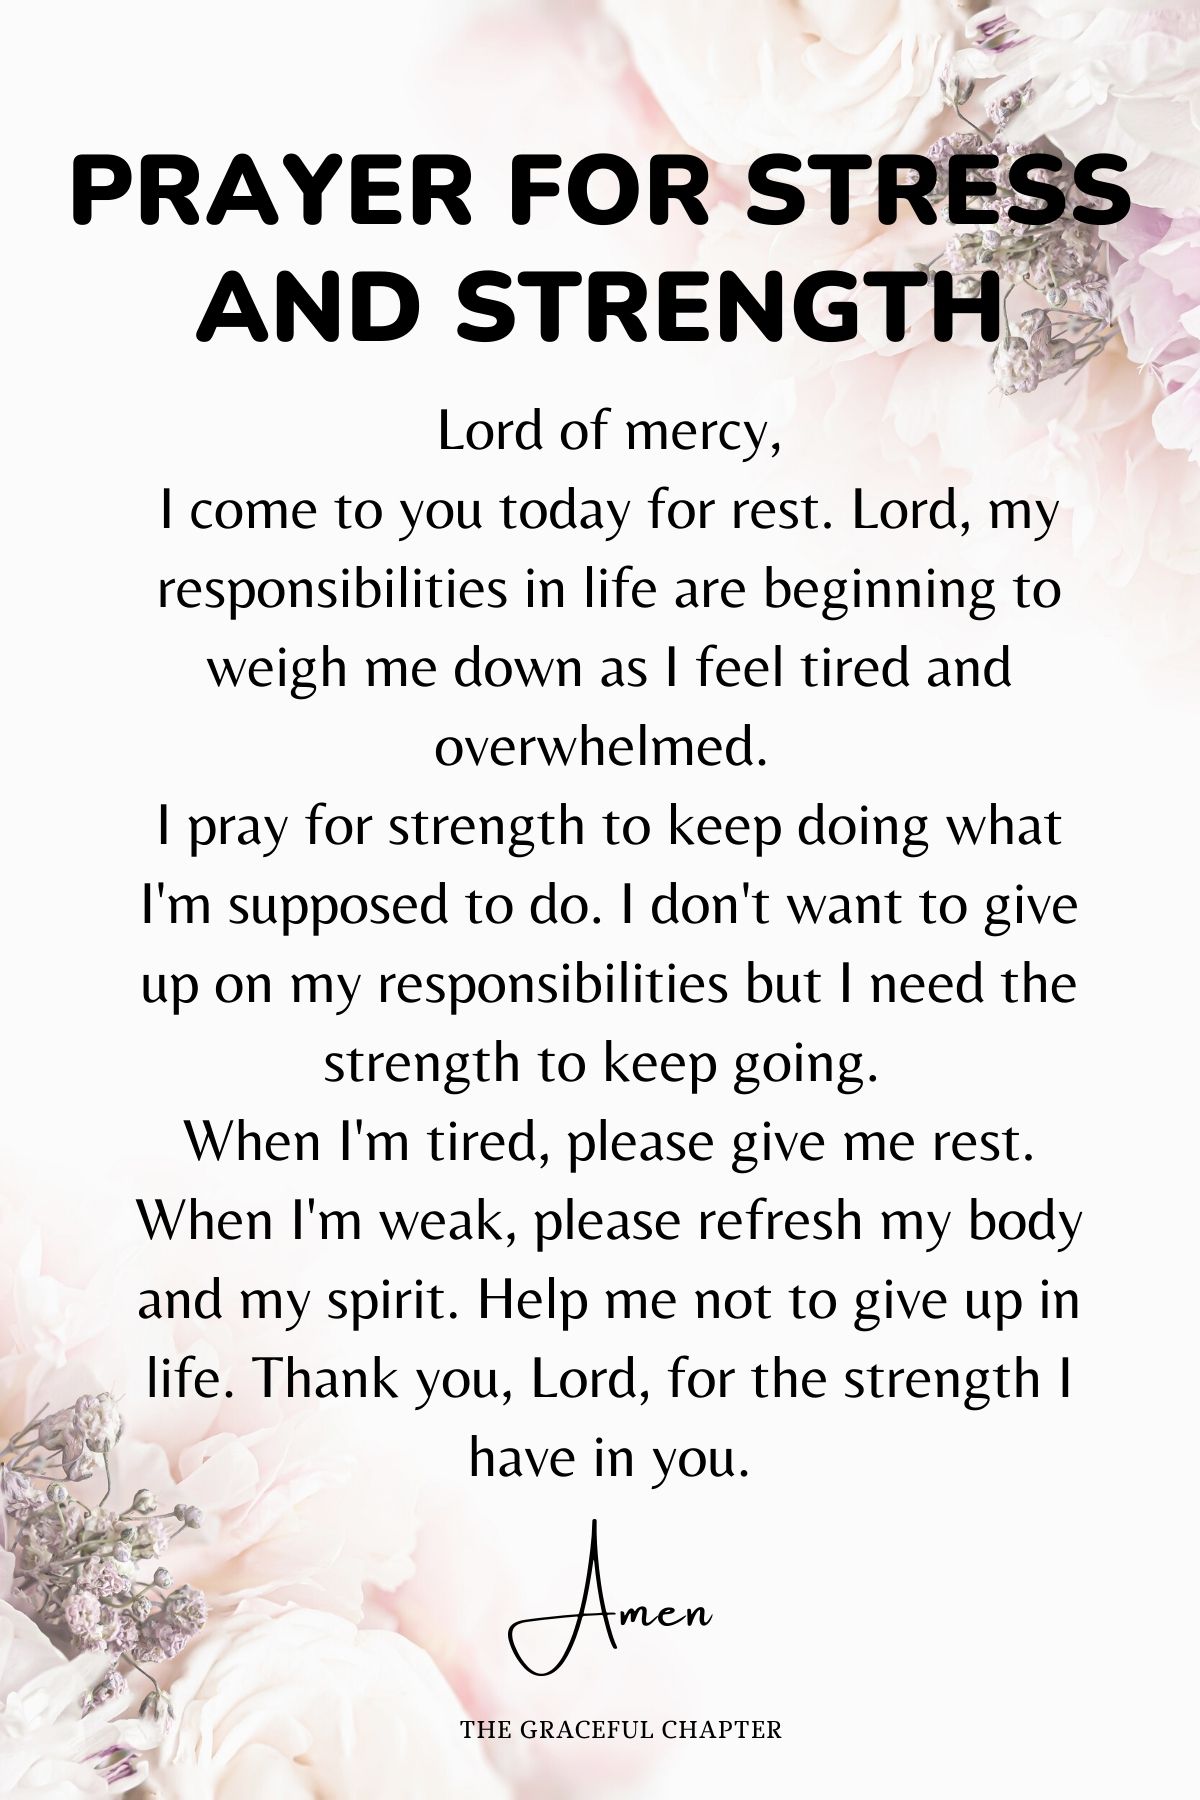 Prayers for stress and strength